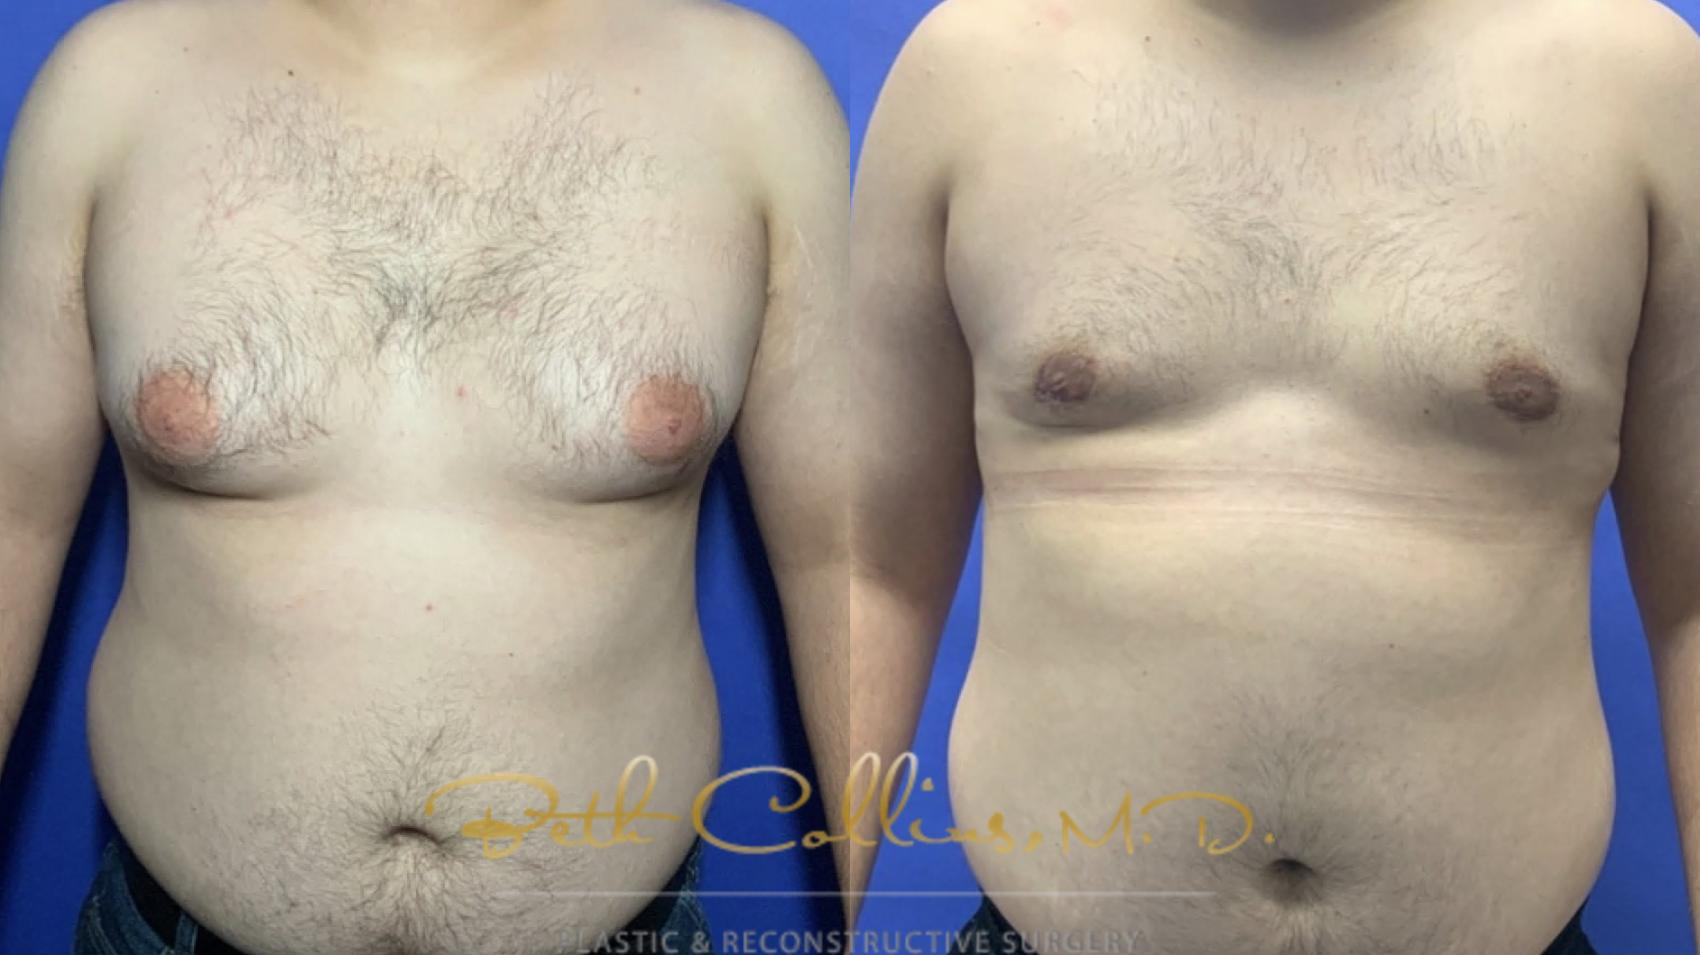 Gynecomastia Surgery: Male breast development is very common affecting up to one third of all men. A simple procedure involving liposuction and in some cases can be transformative. 